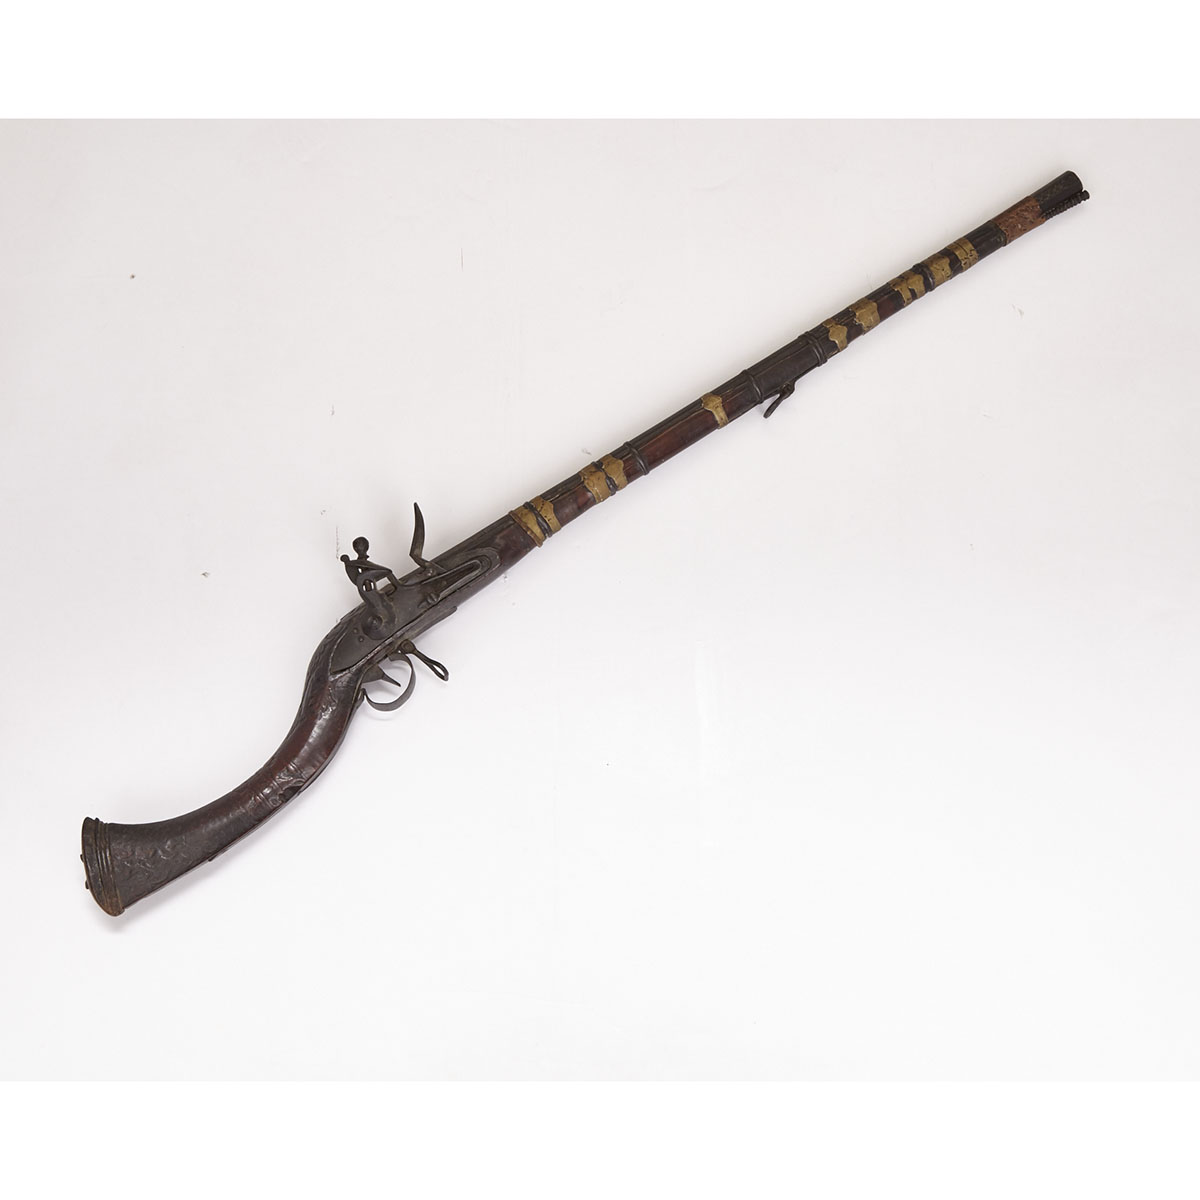 Middle Eastern Miquelet Lock Musket, 18th century